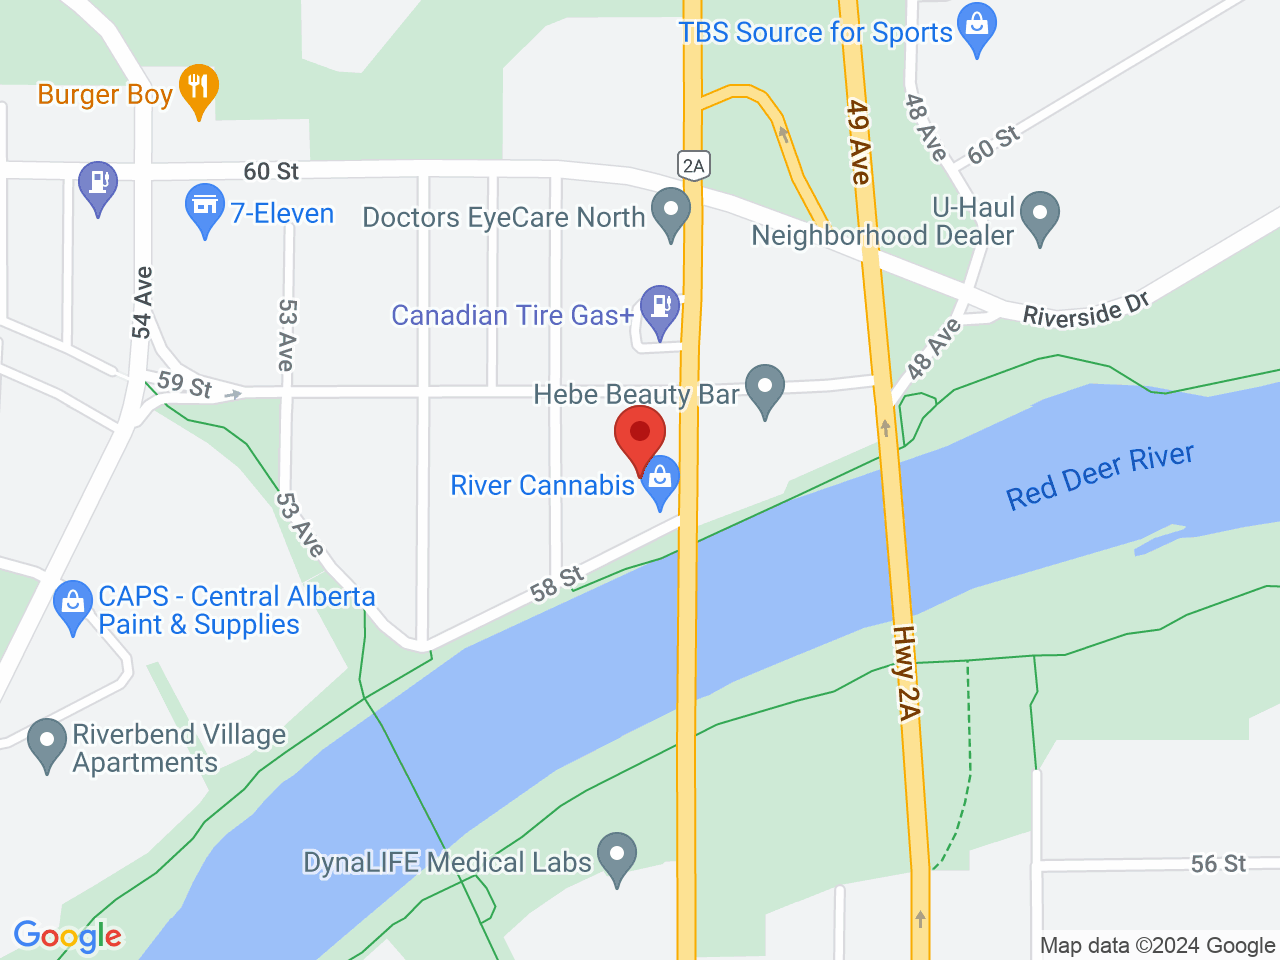 Street map for River Cannabis, 3-5804 50 Ave., Red Deer AB